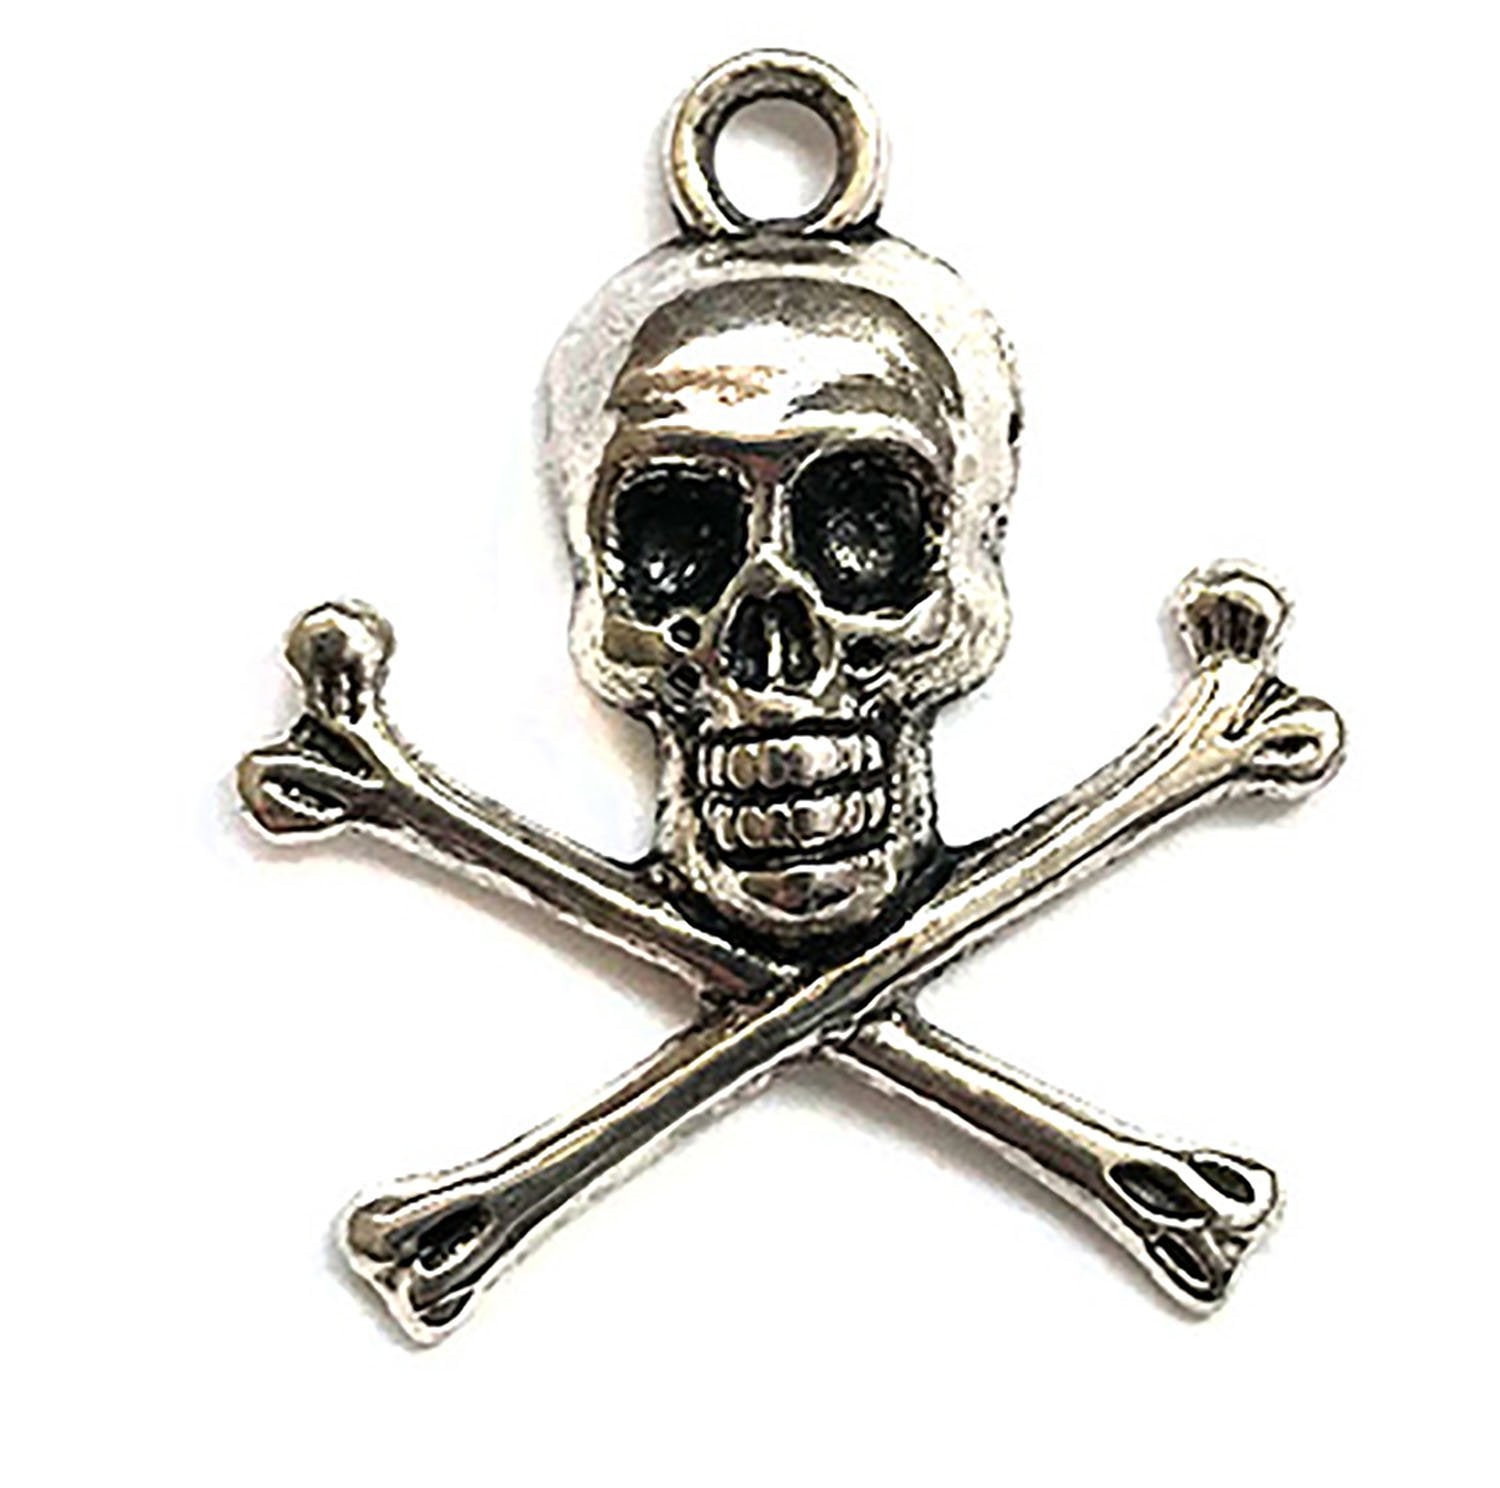 Skull & Crossbone Charm - Buttons Galore and More